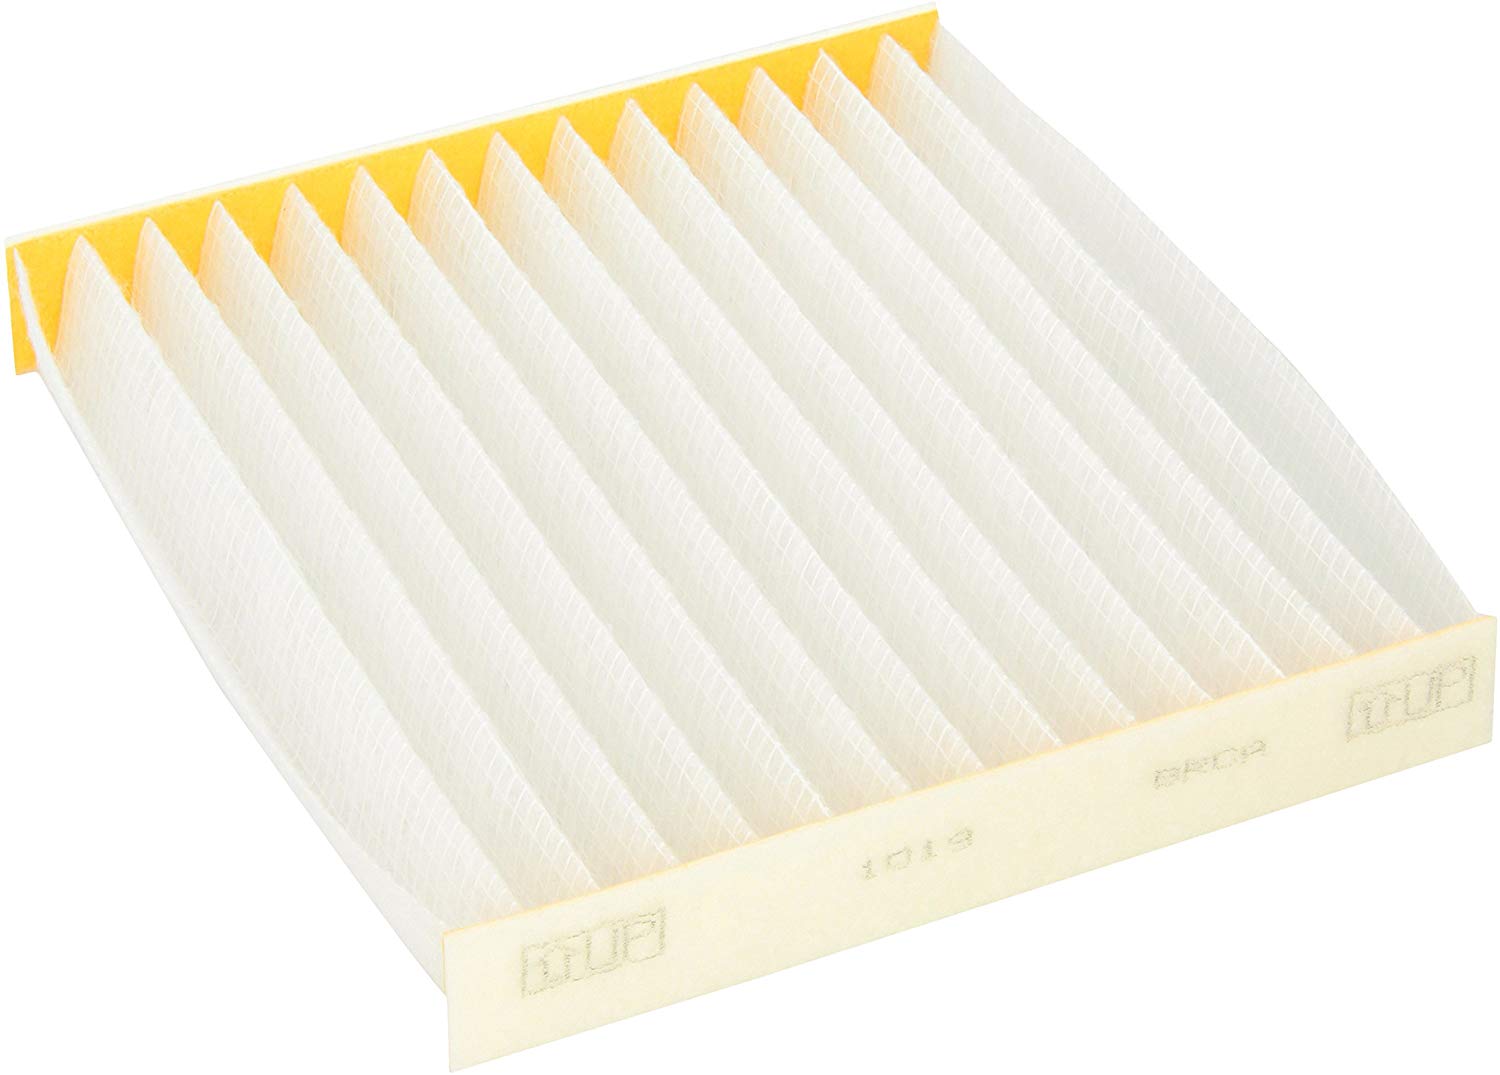 Denso 453-1019 First Time Fit Cabin Air Filter for select Lexus/Scion/Toyota models